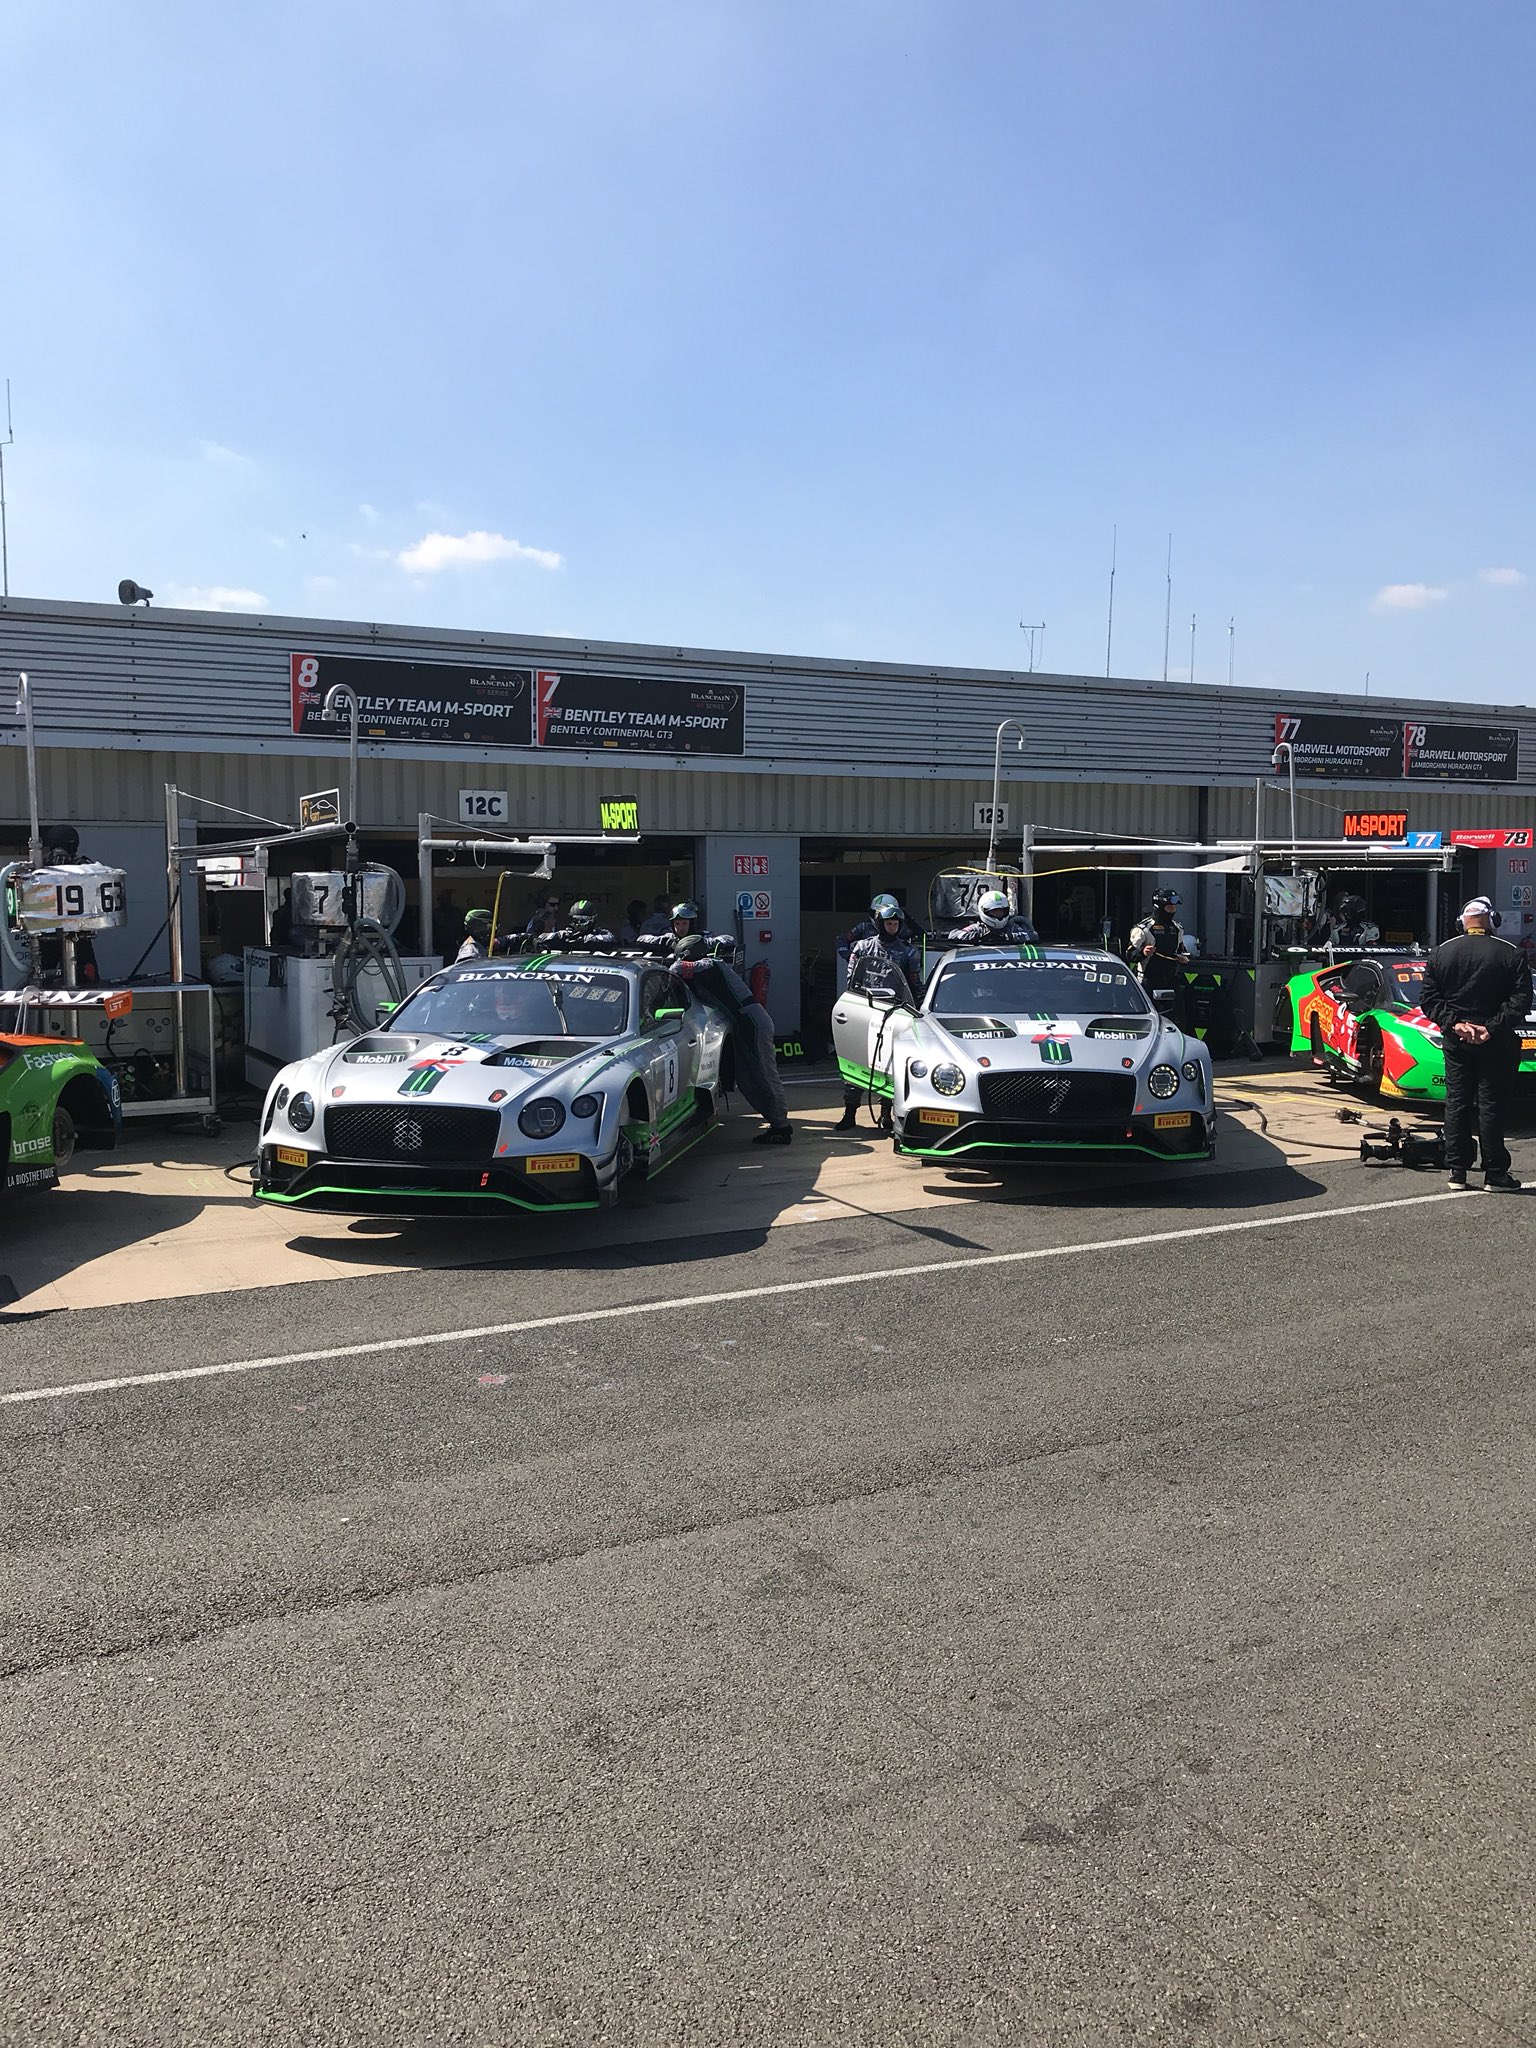 Nick Burns on Twitter "Good luck to all the Bentley Drivers this weekend SouletMaxime ASoucek VinceAbril TheStevenKane JulesGounon and wel e on